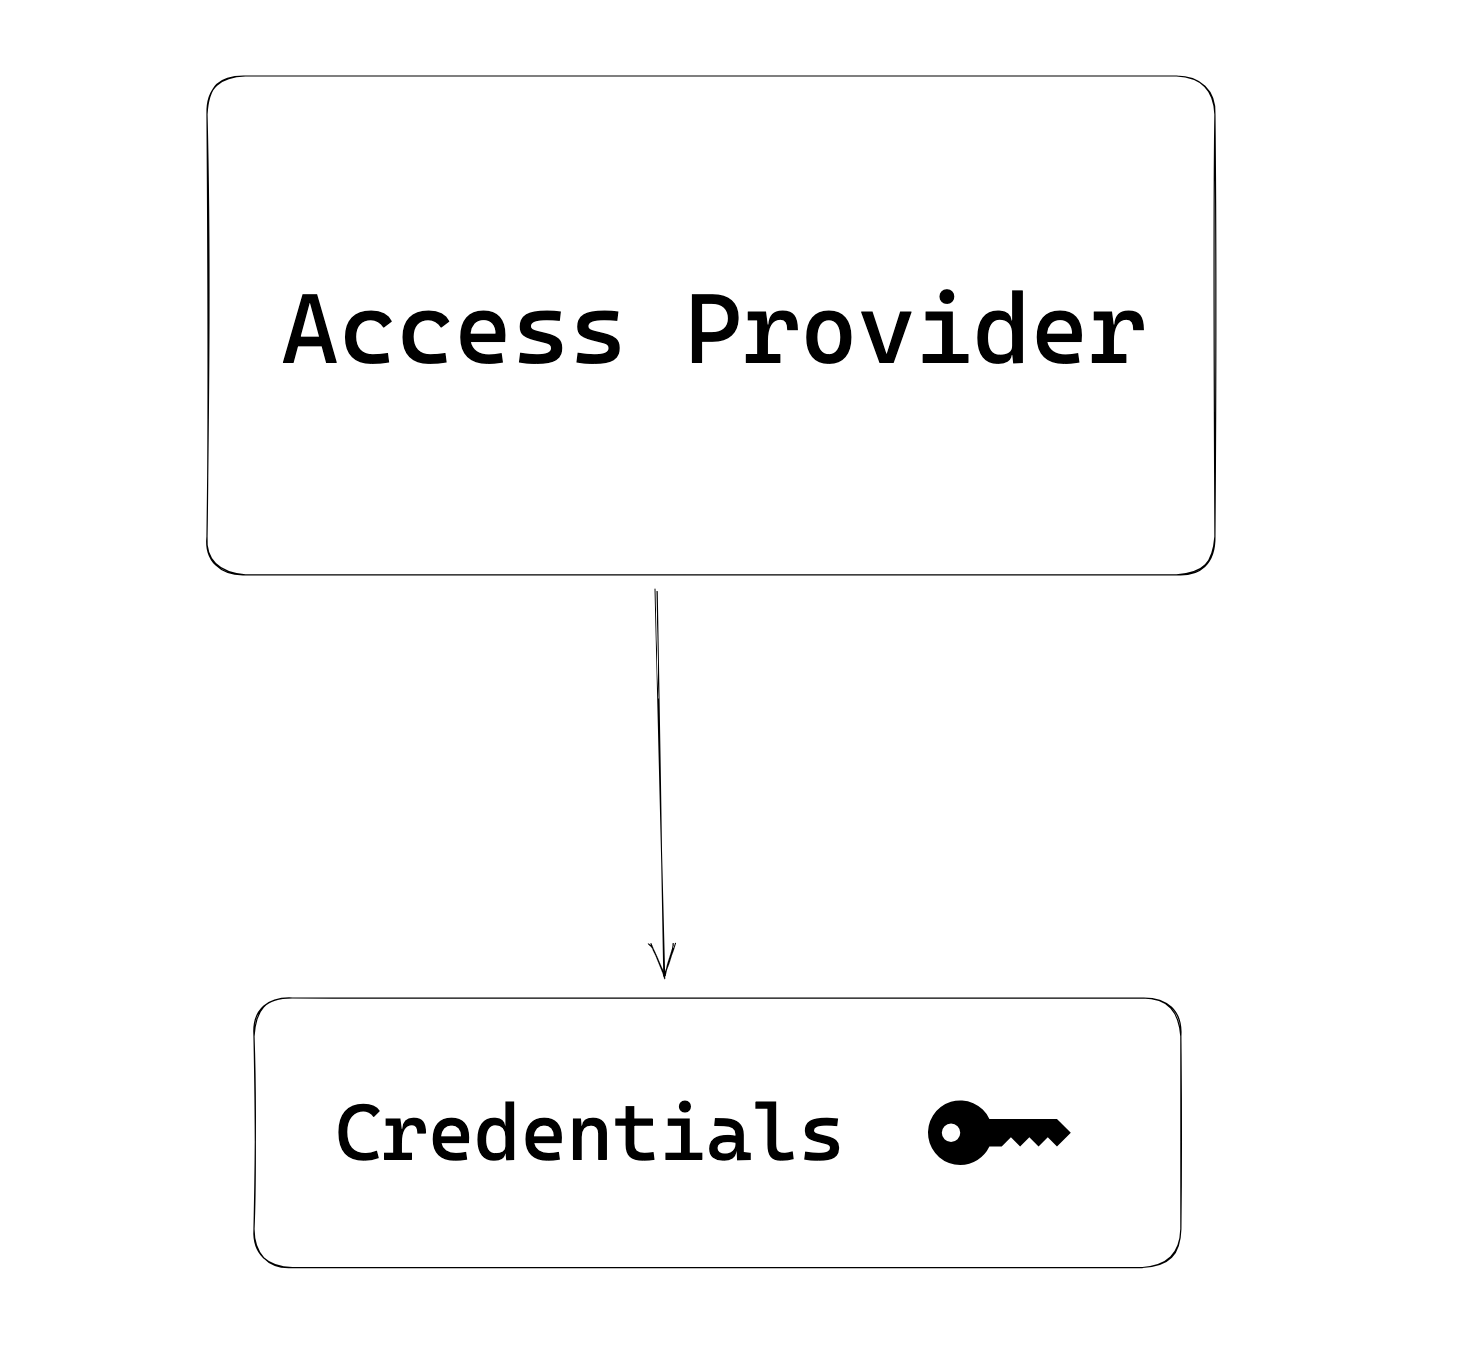 A diagram showing an Access Provider connected to some credentials